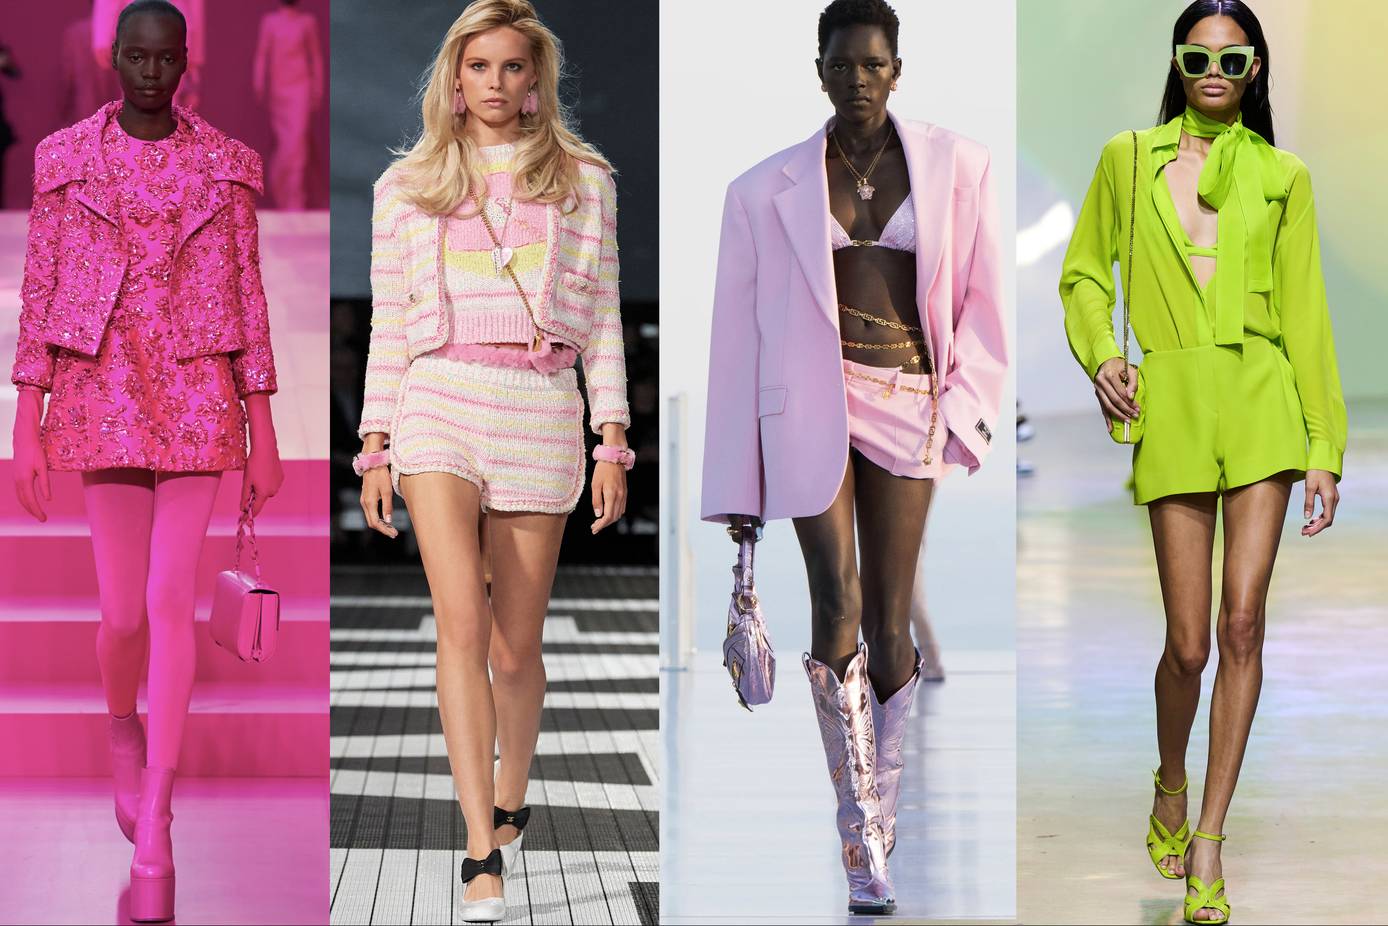 The Barbie Aesthetic, Barbiecore Outfits